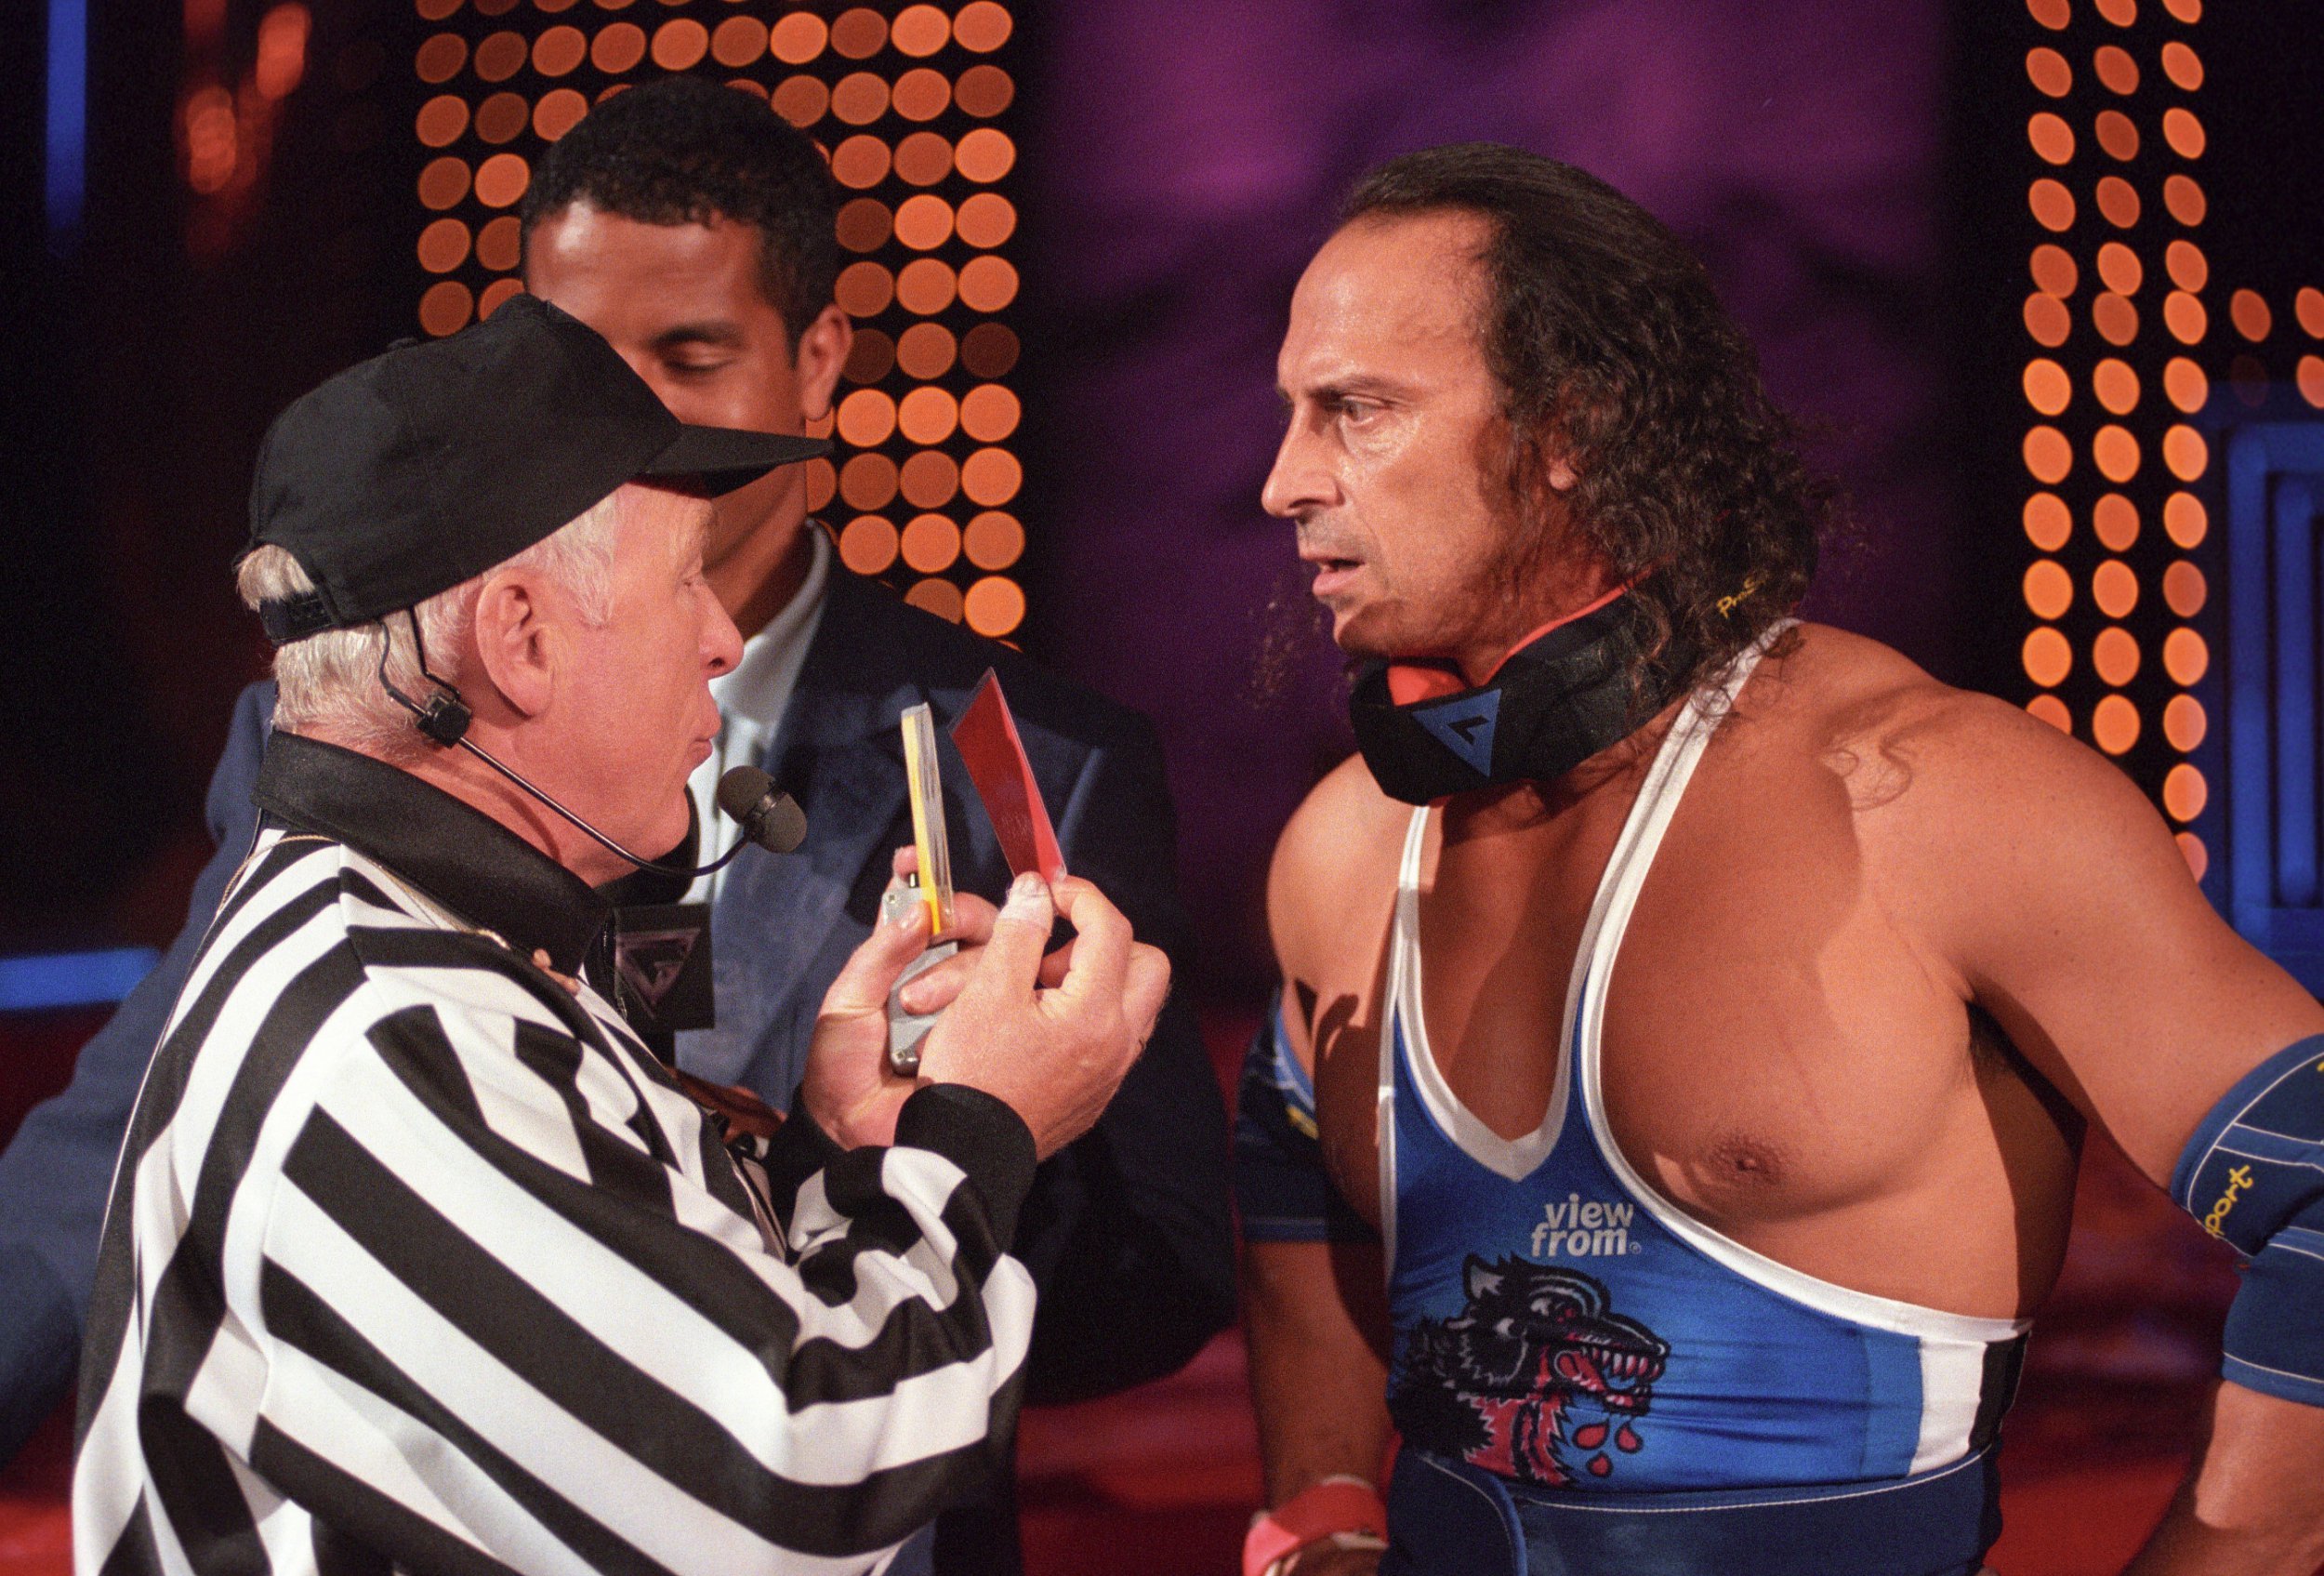 Wolf receiving one of many warnings from Gladiators referee John Anderson.